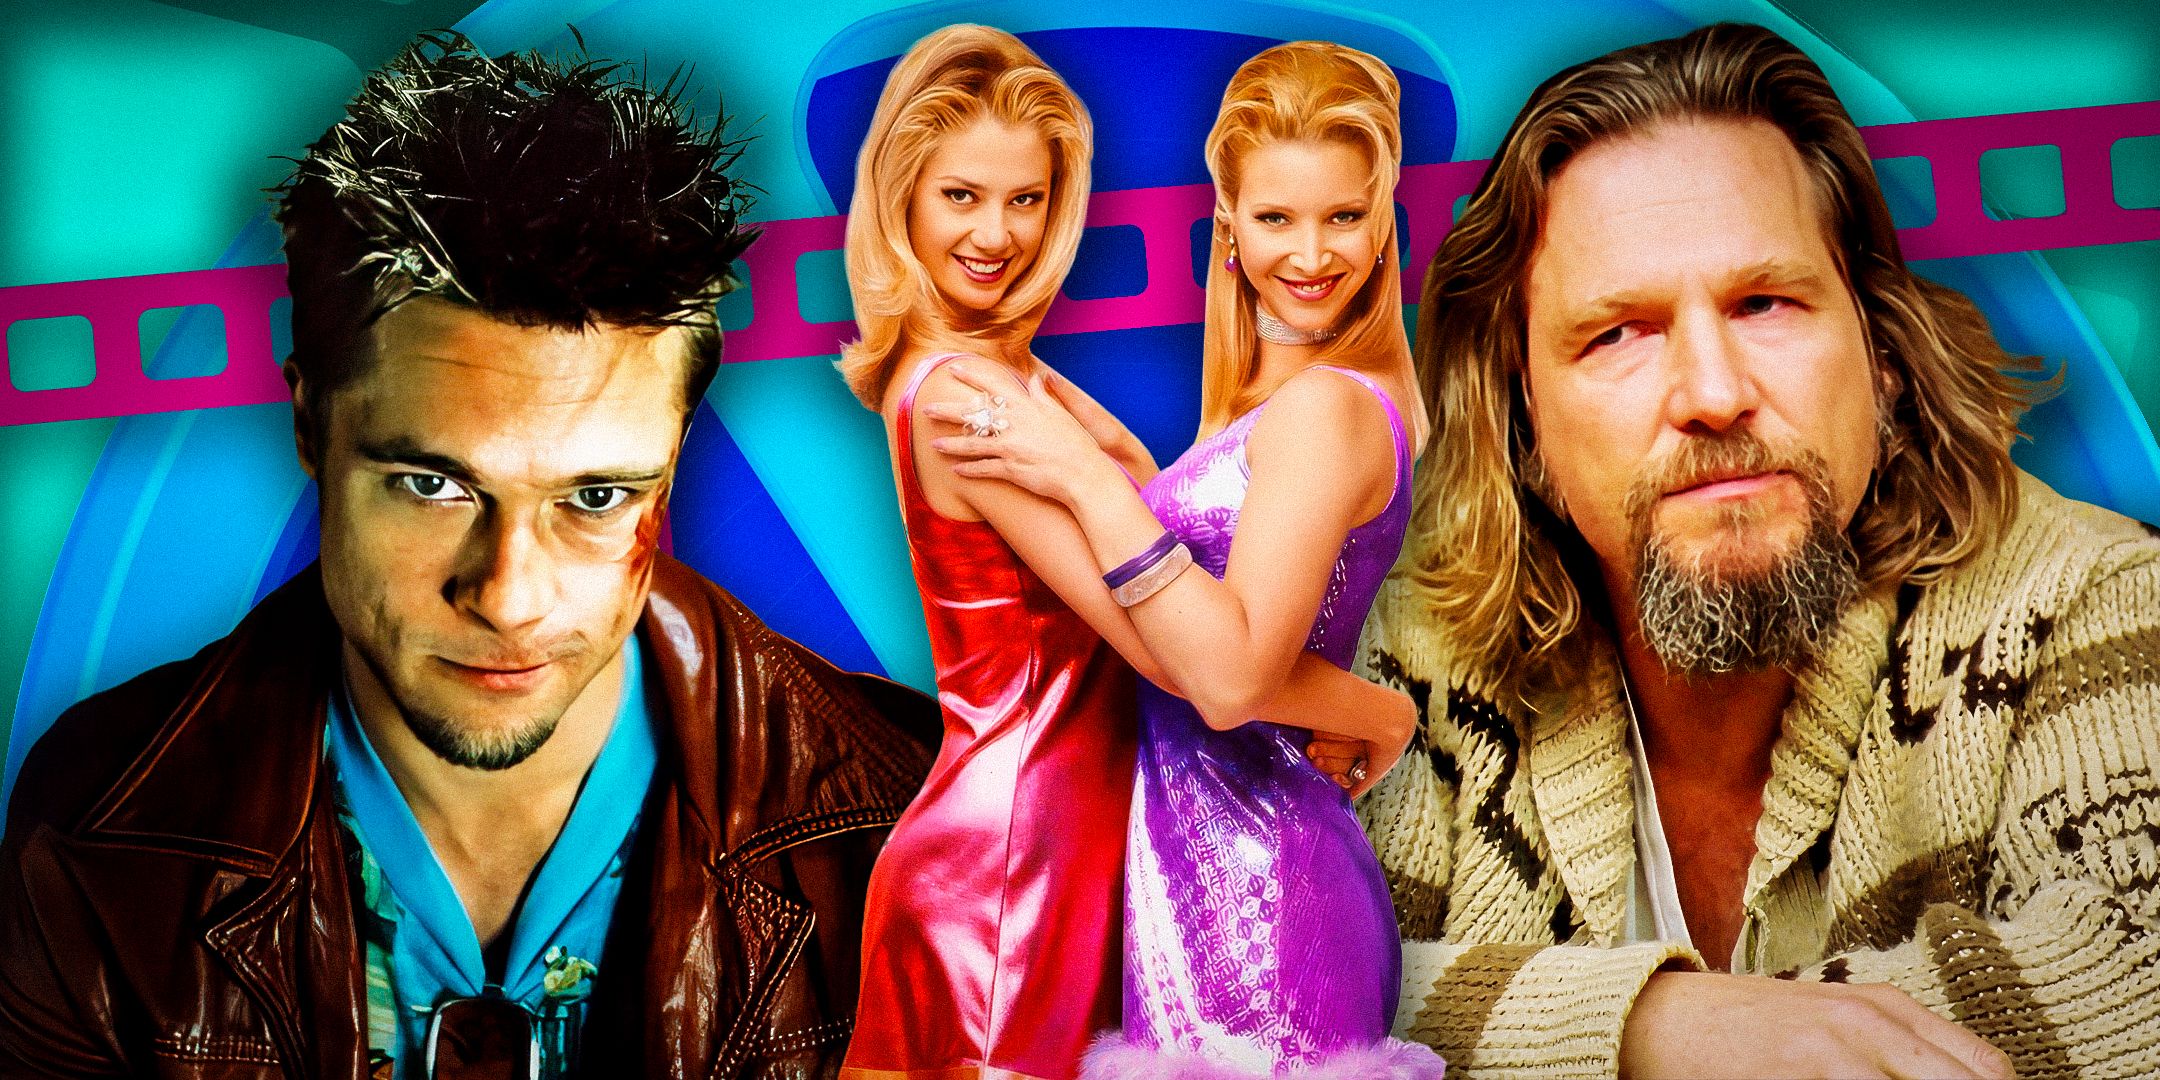 Romy and Michele from Romy and Michele's High School Reunion, Tyler Durden from Fight Club and Jeff Bridges as The Dude from The Big Lebowski 